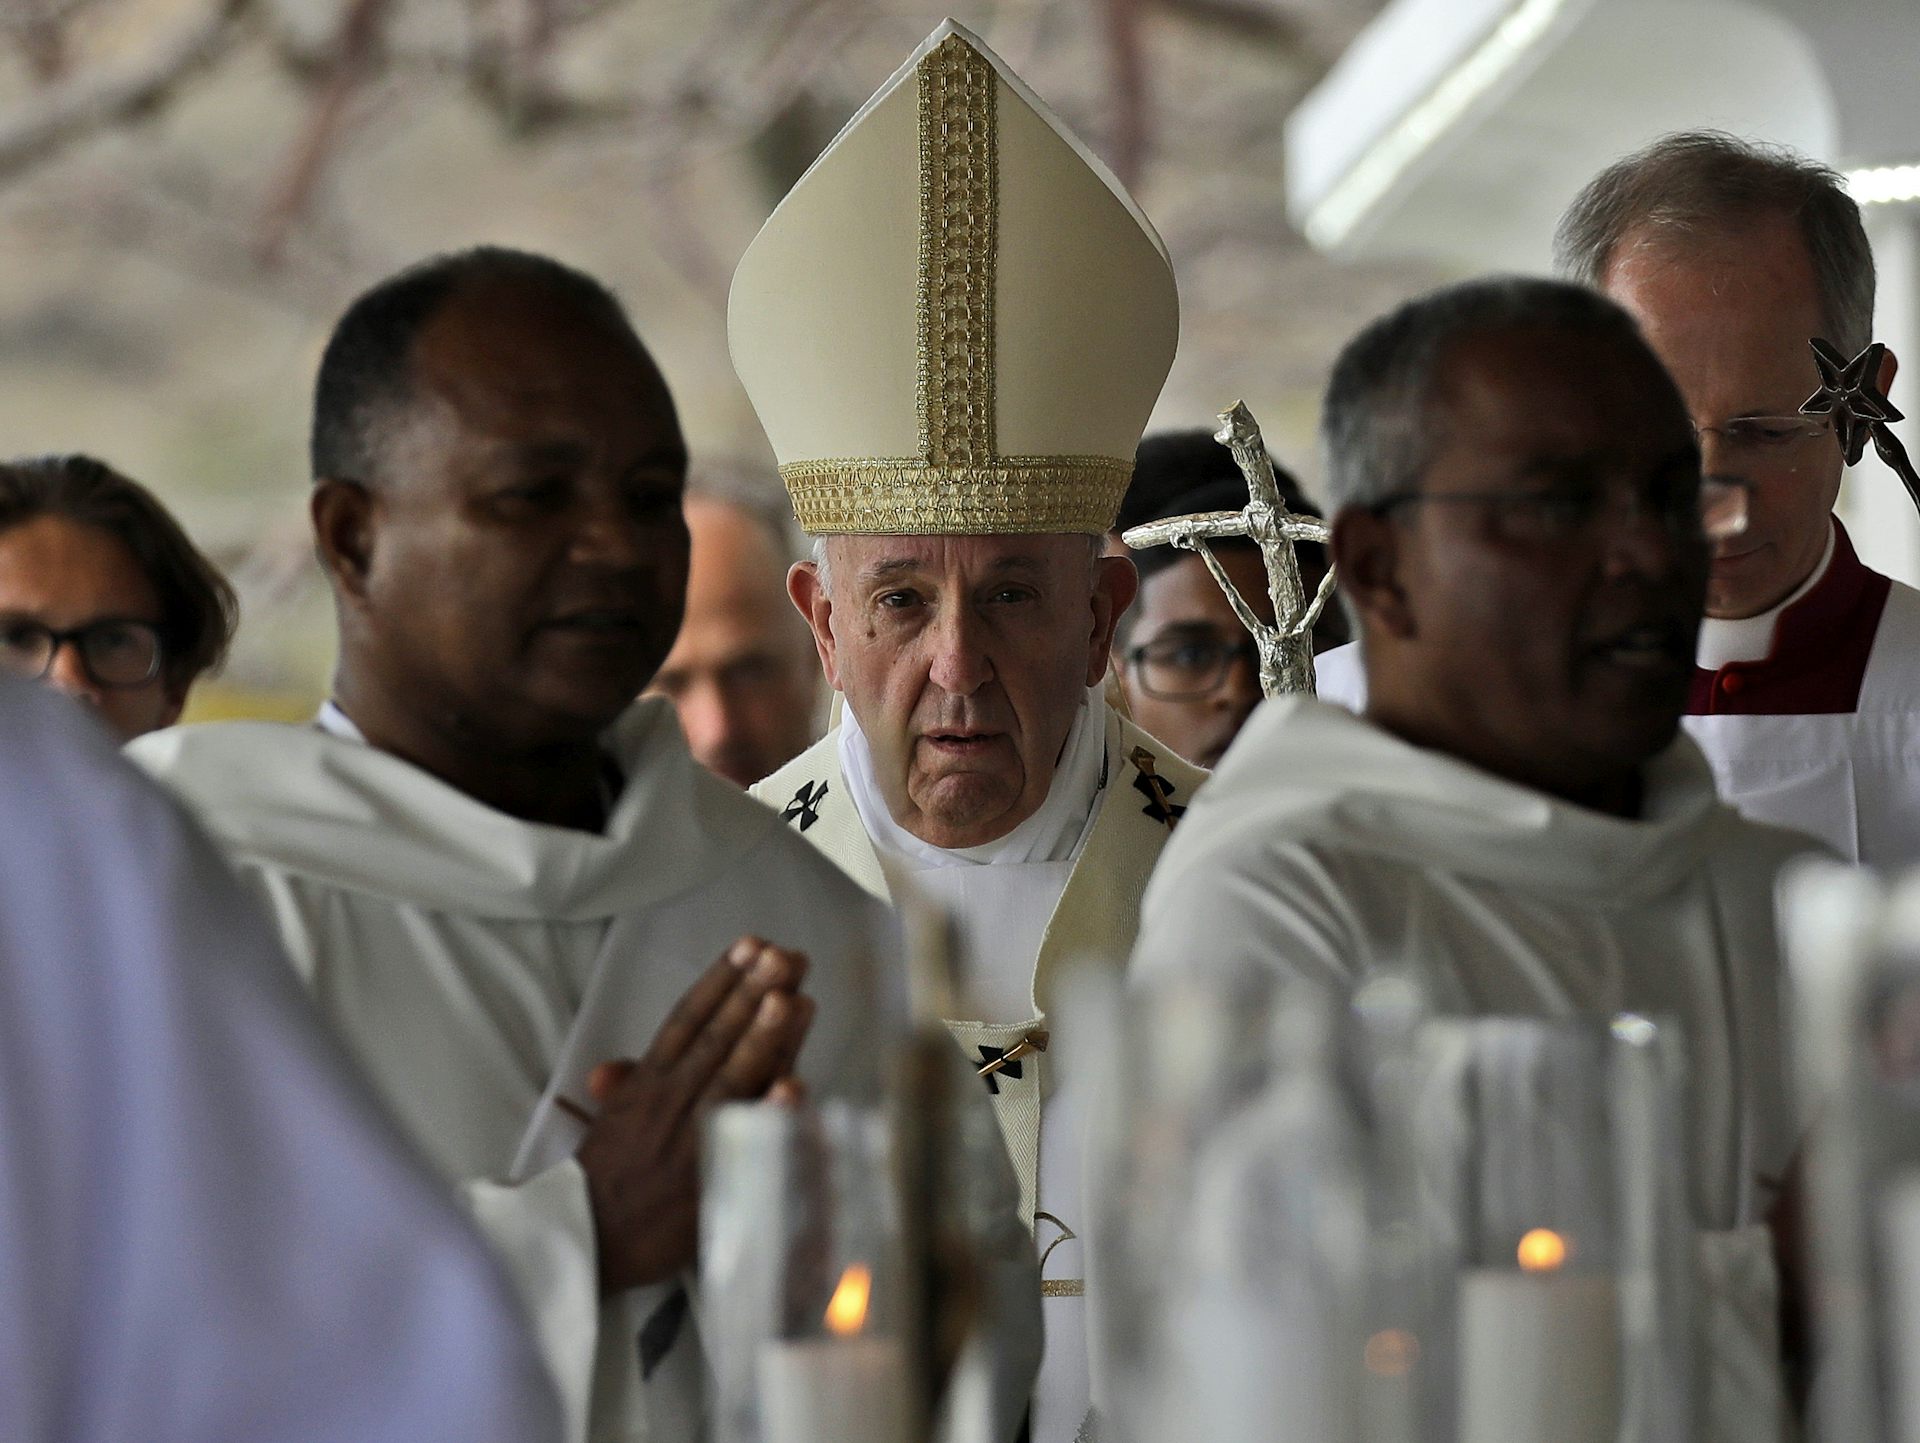 Africa’s Catholic Churches Face Competition and a Troubled Legacy as They Grow